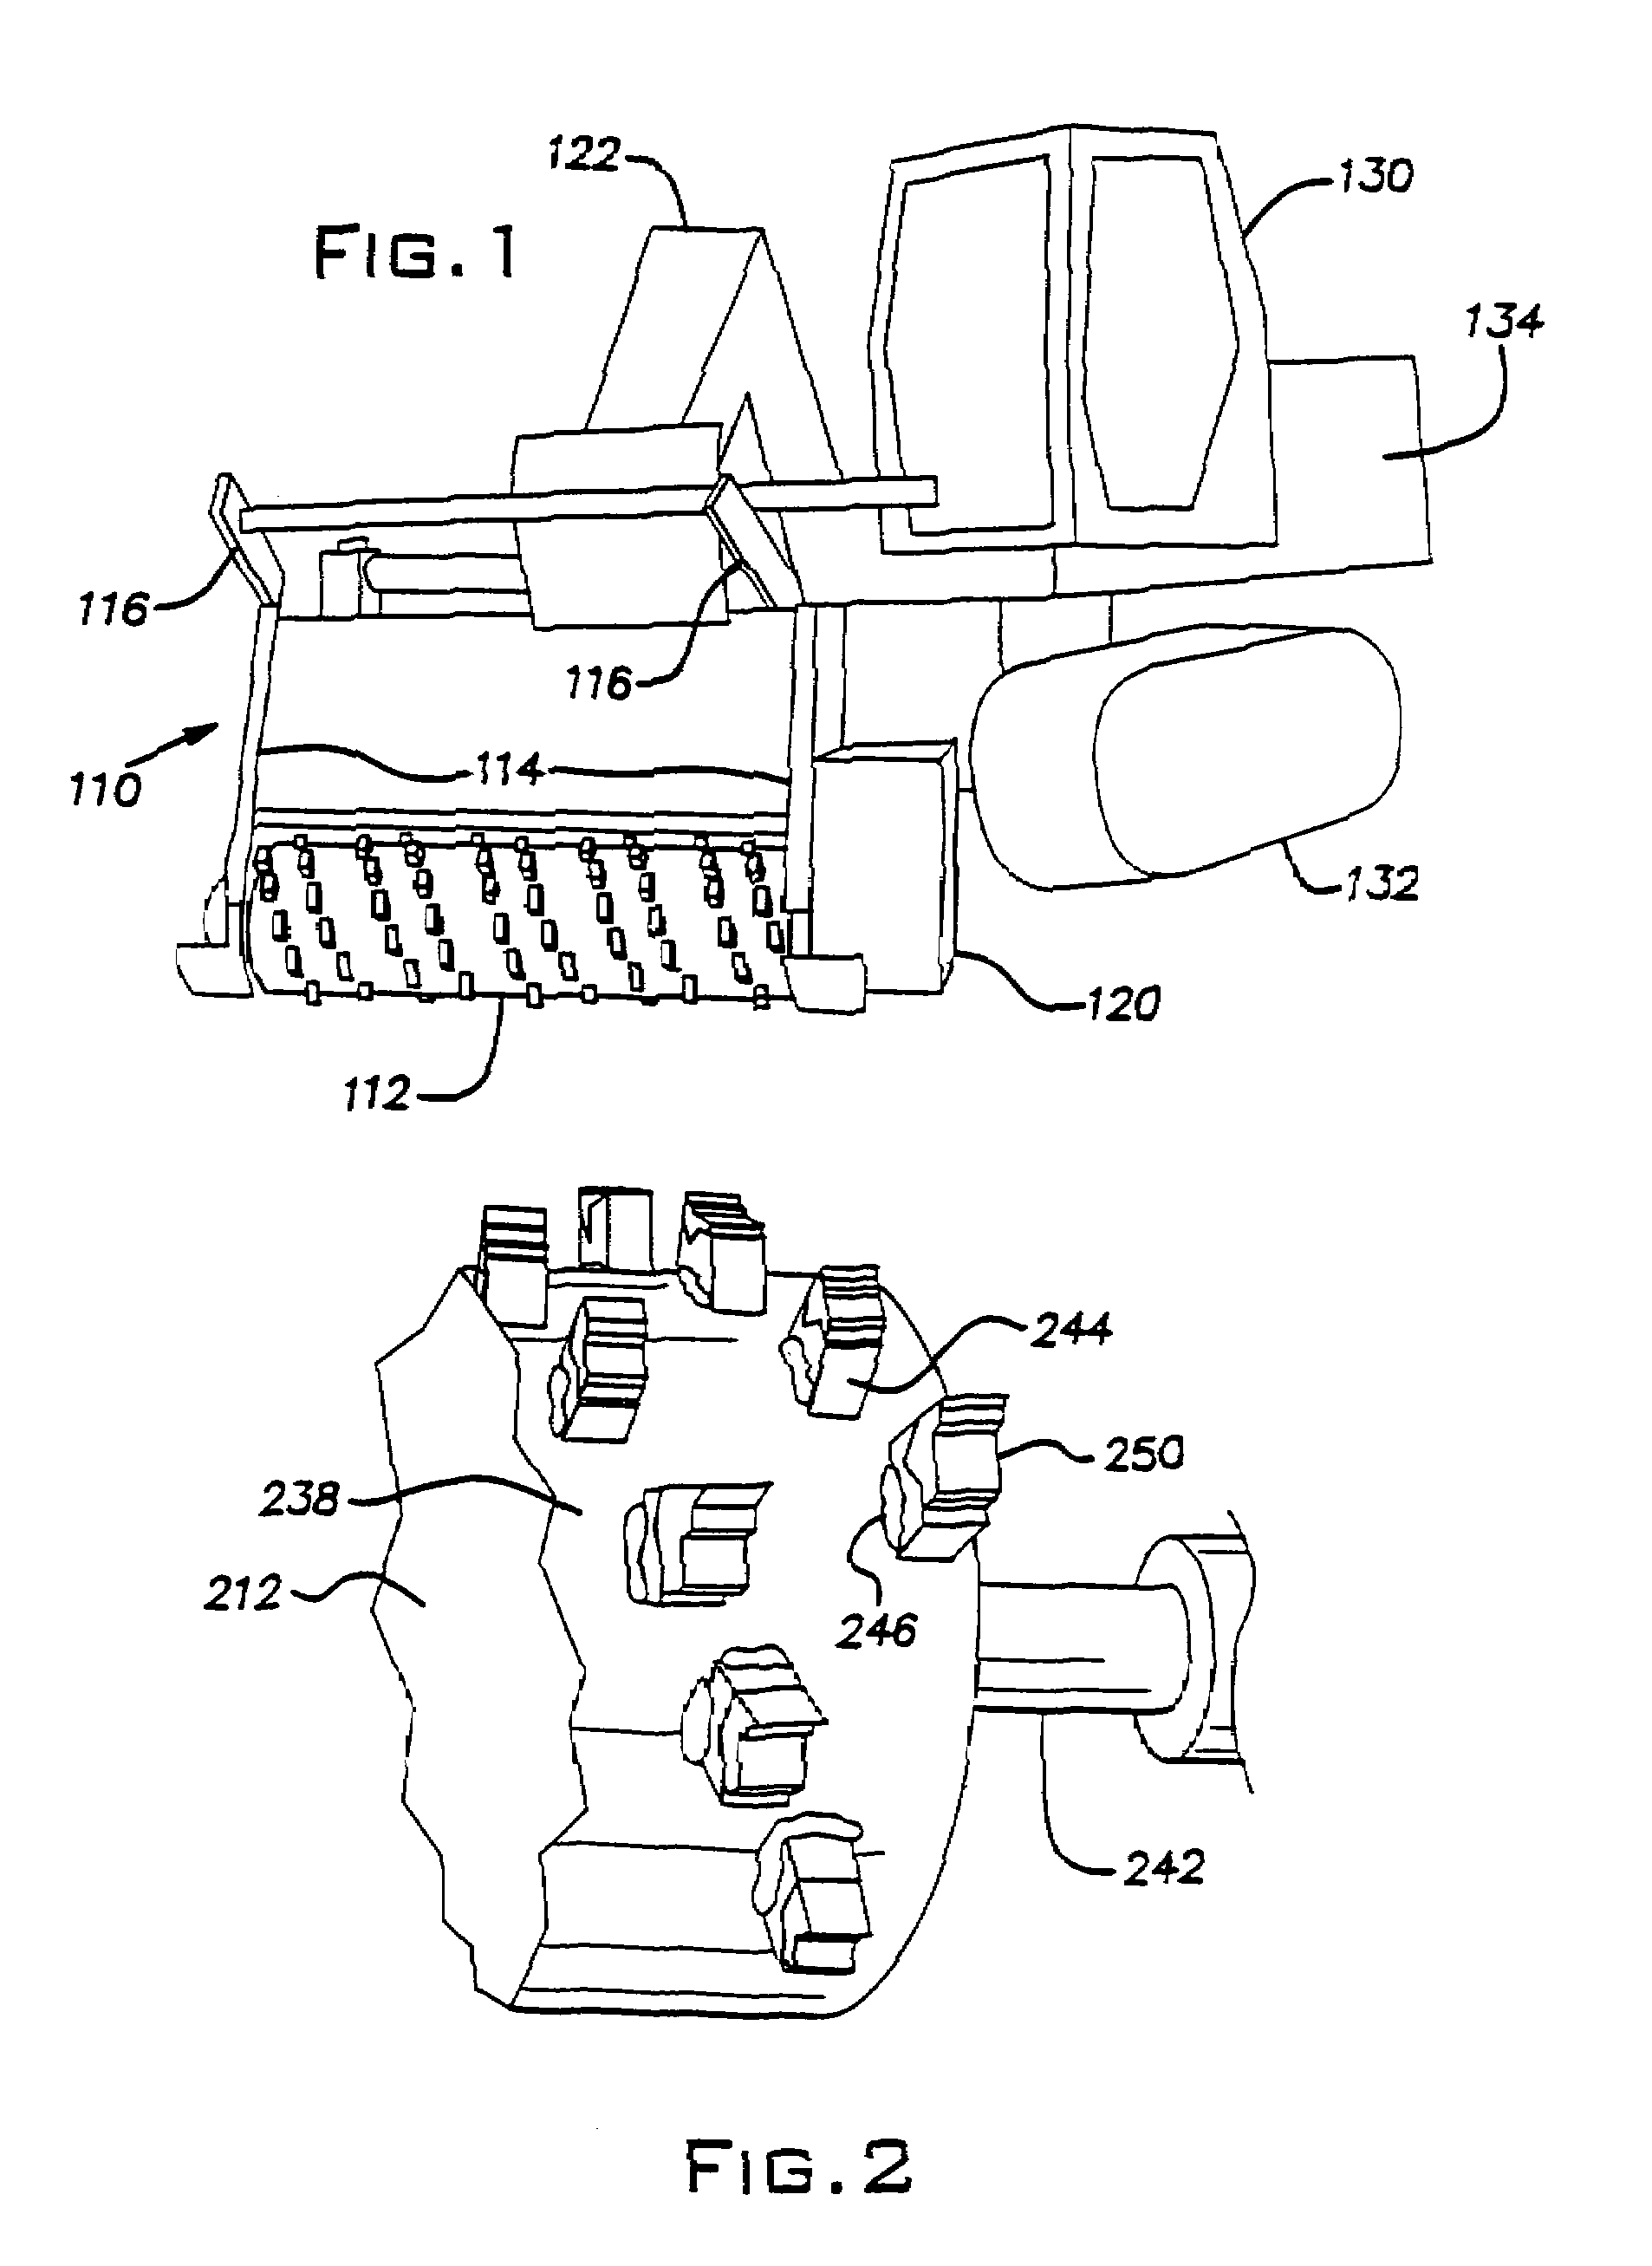 Shredding apparatus and method of clearing land therewith